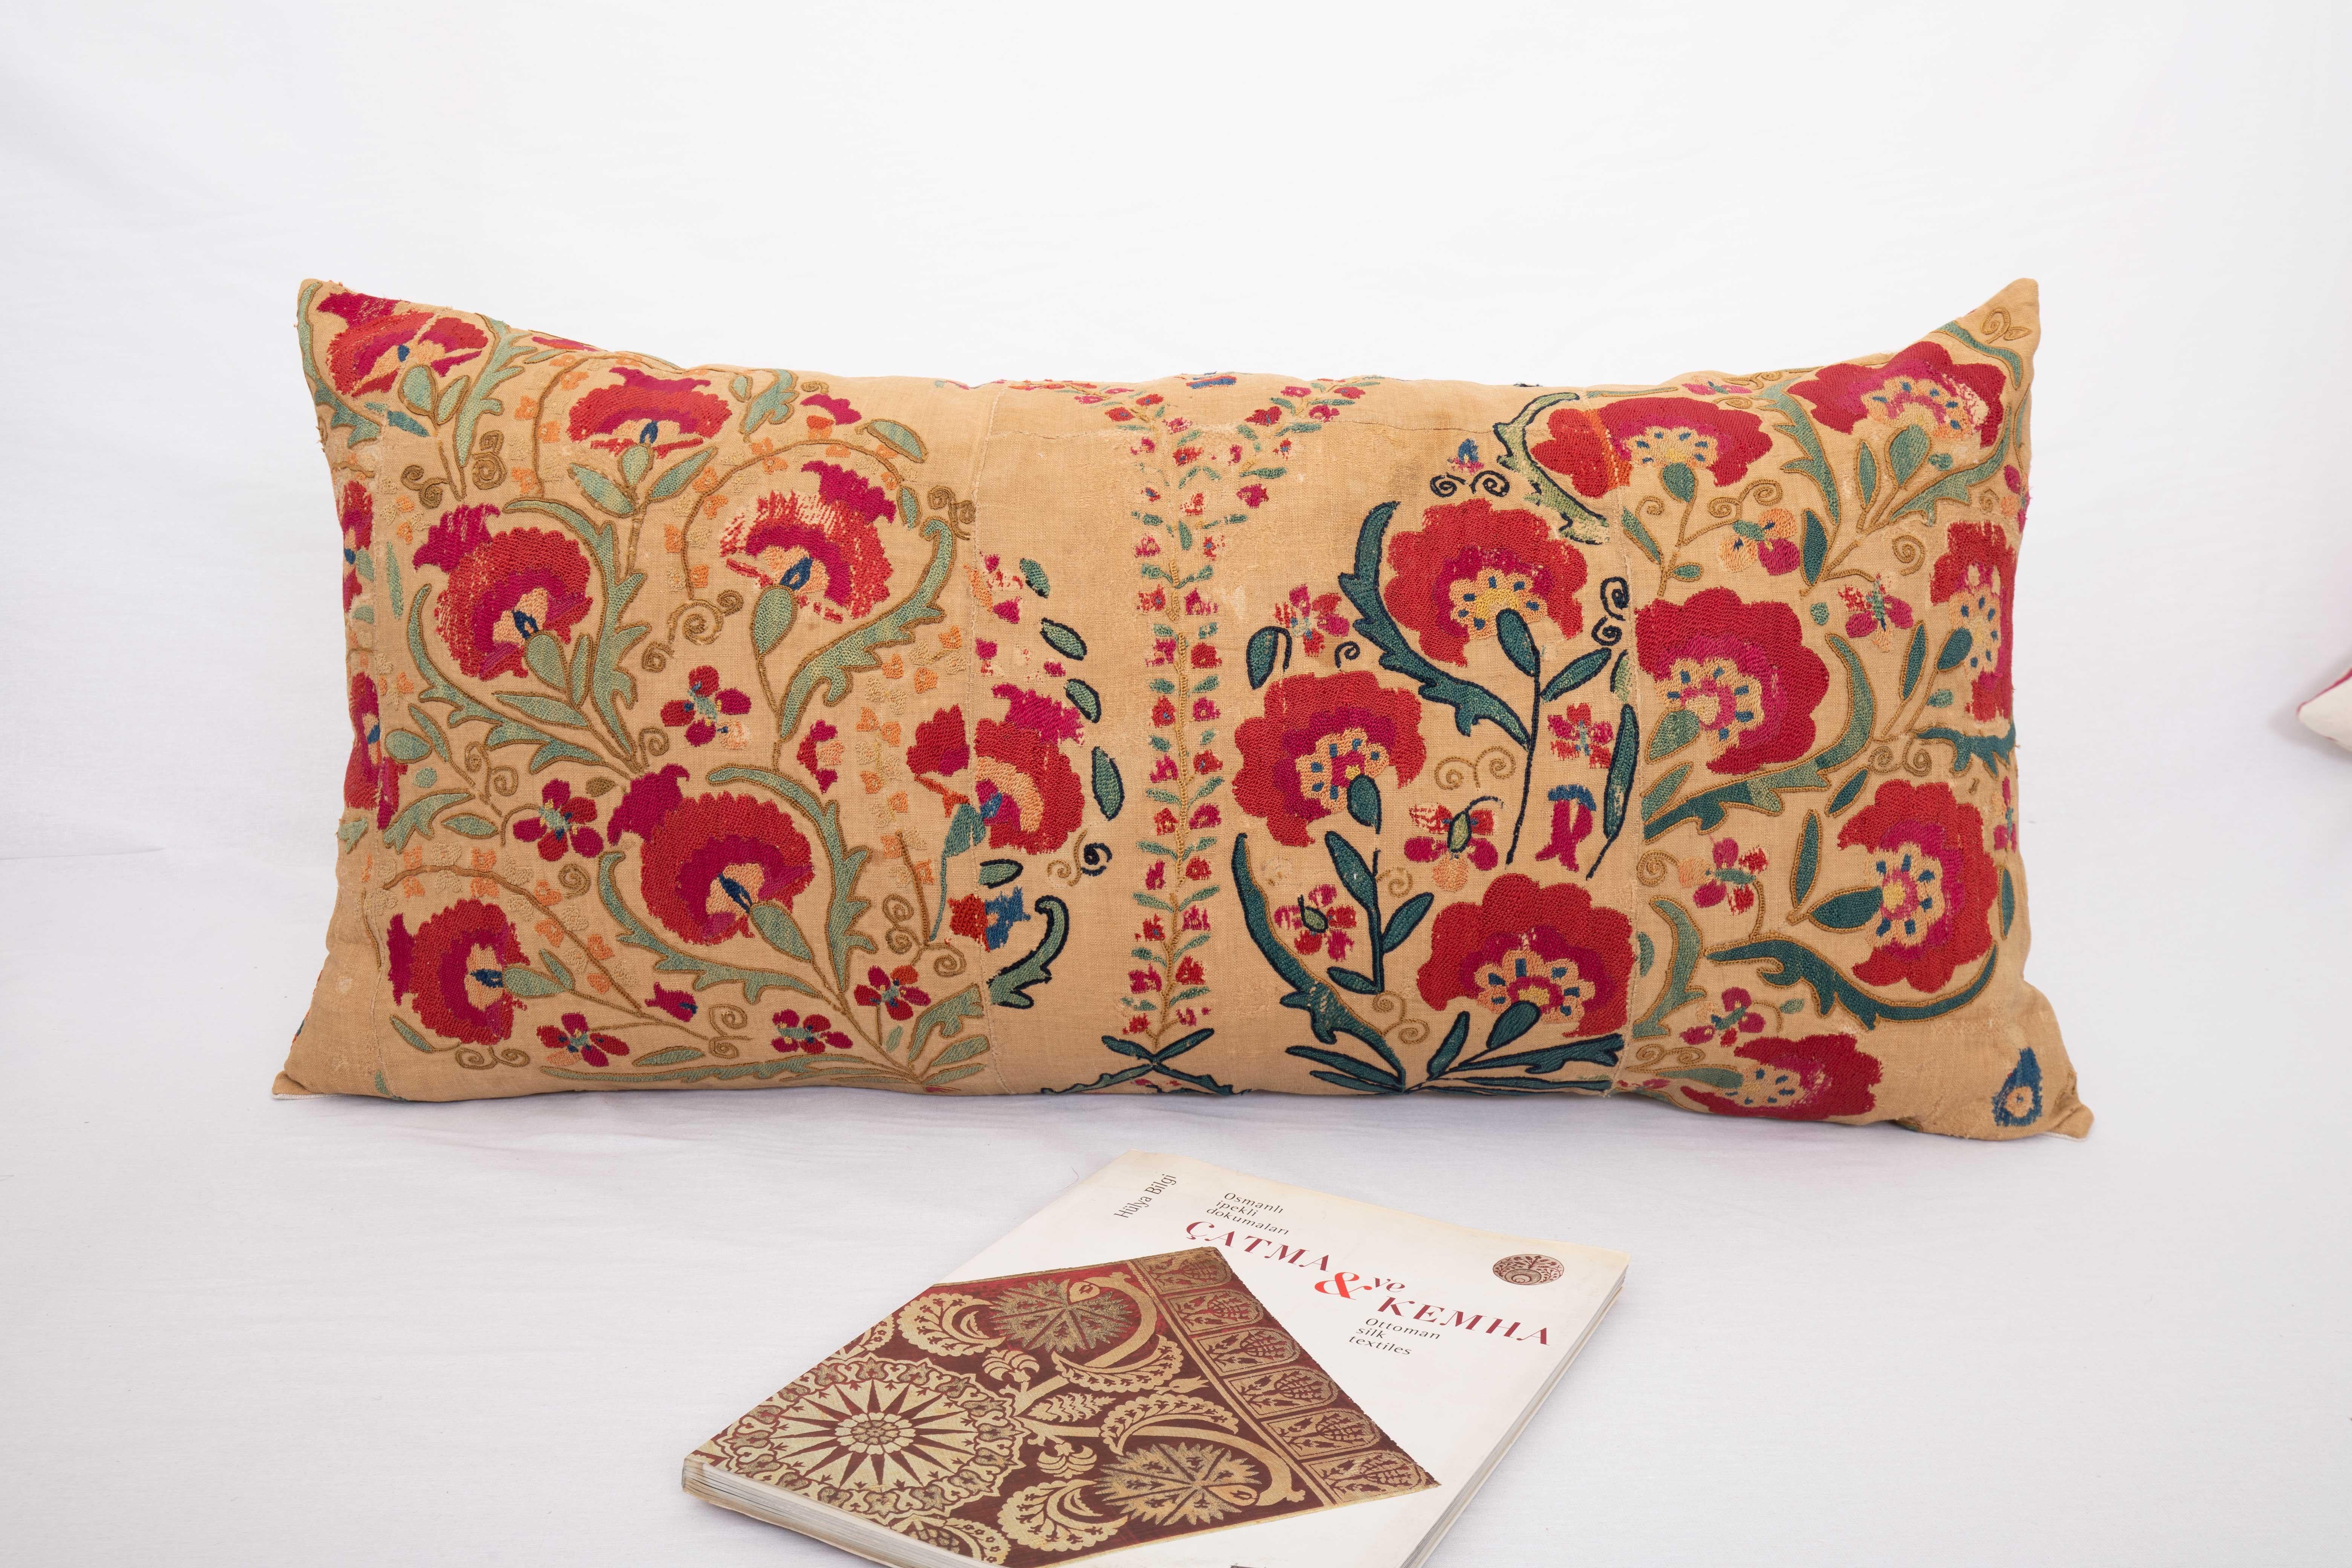 Uzbek Suzani Pillow Case made from an Antique suzani Fragment, 19th C.